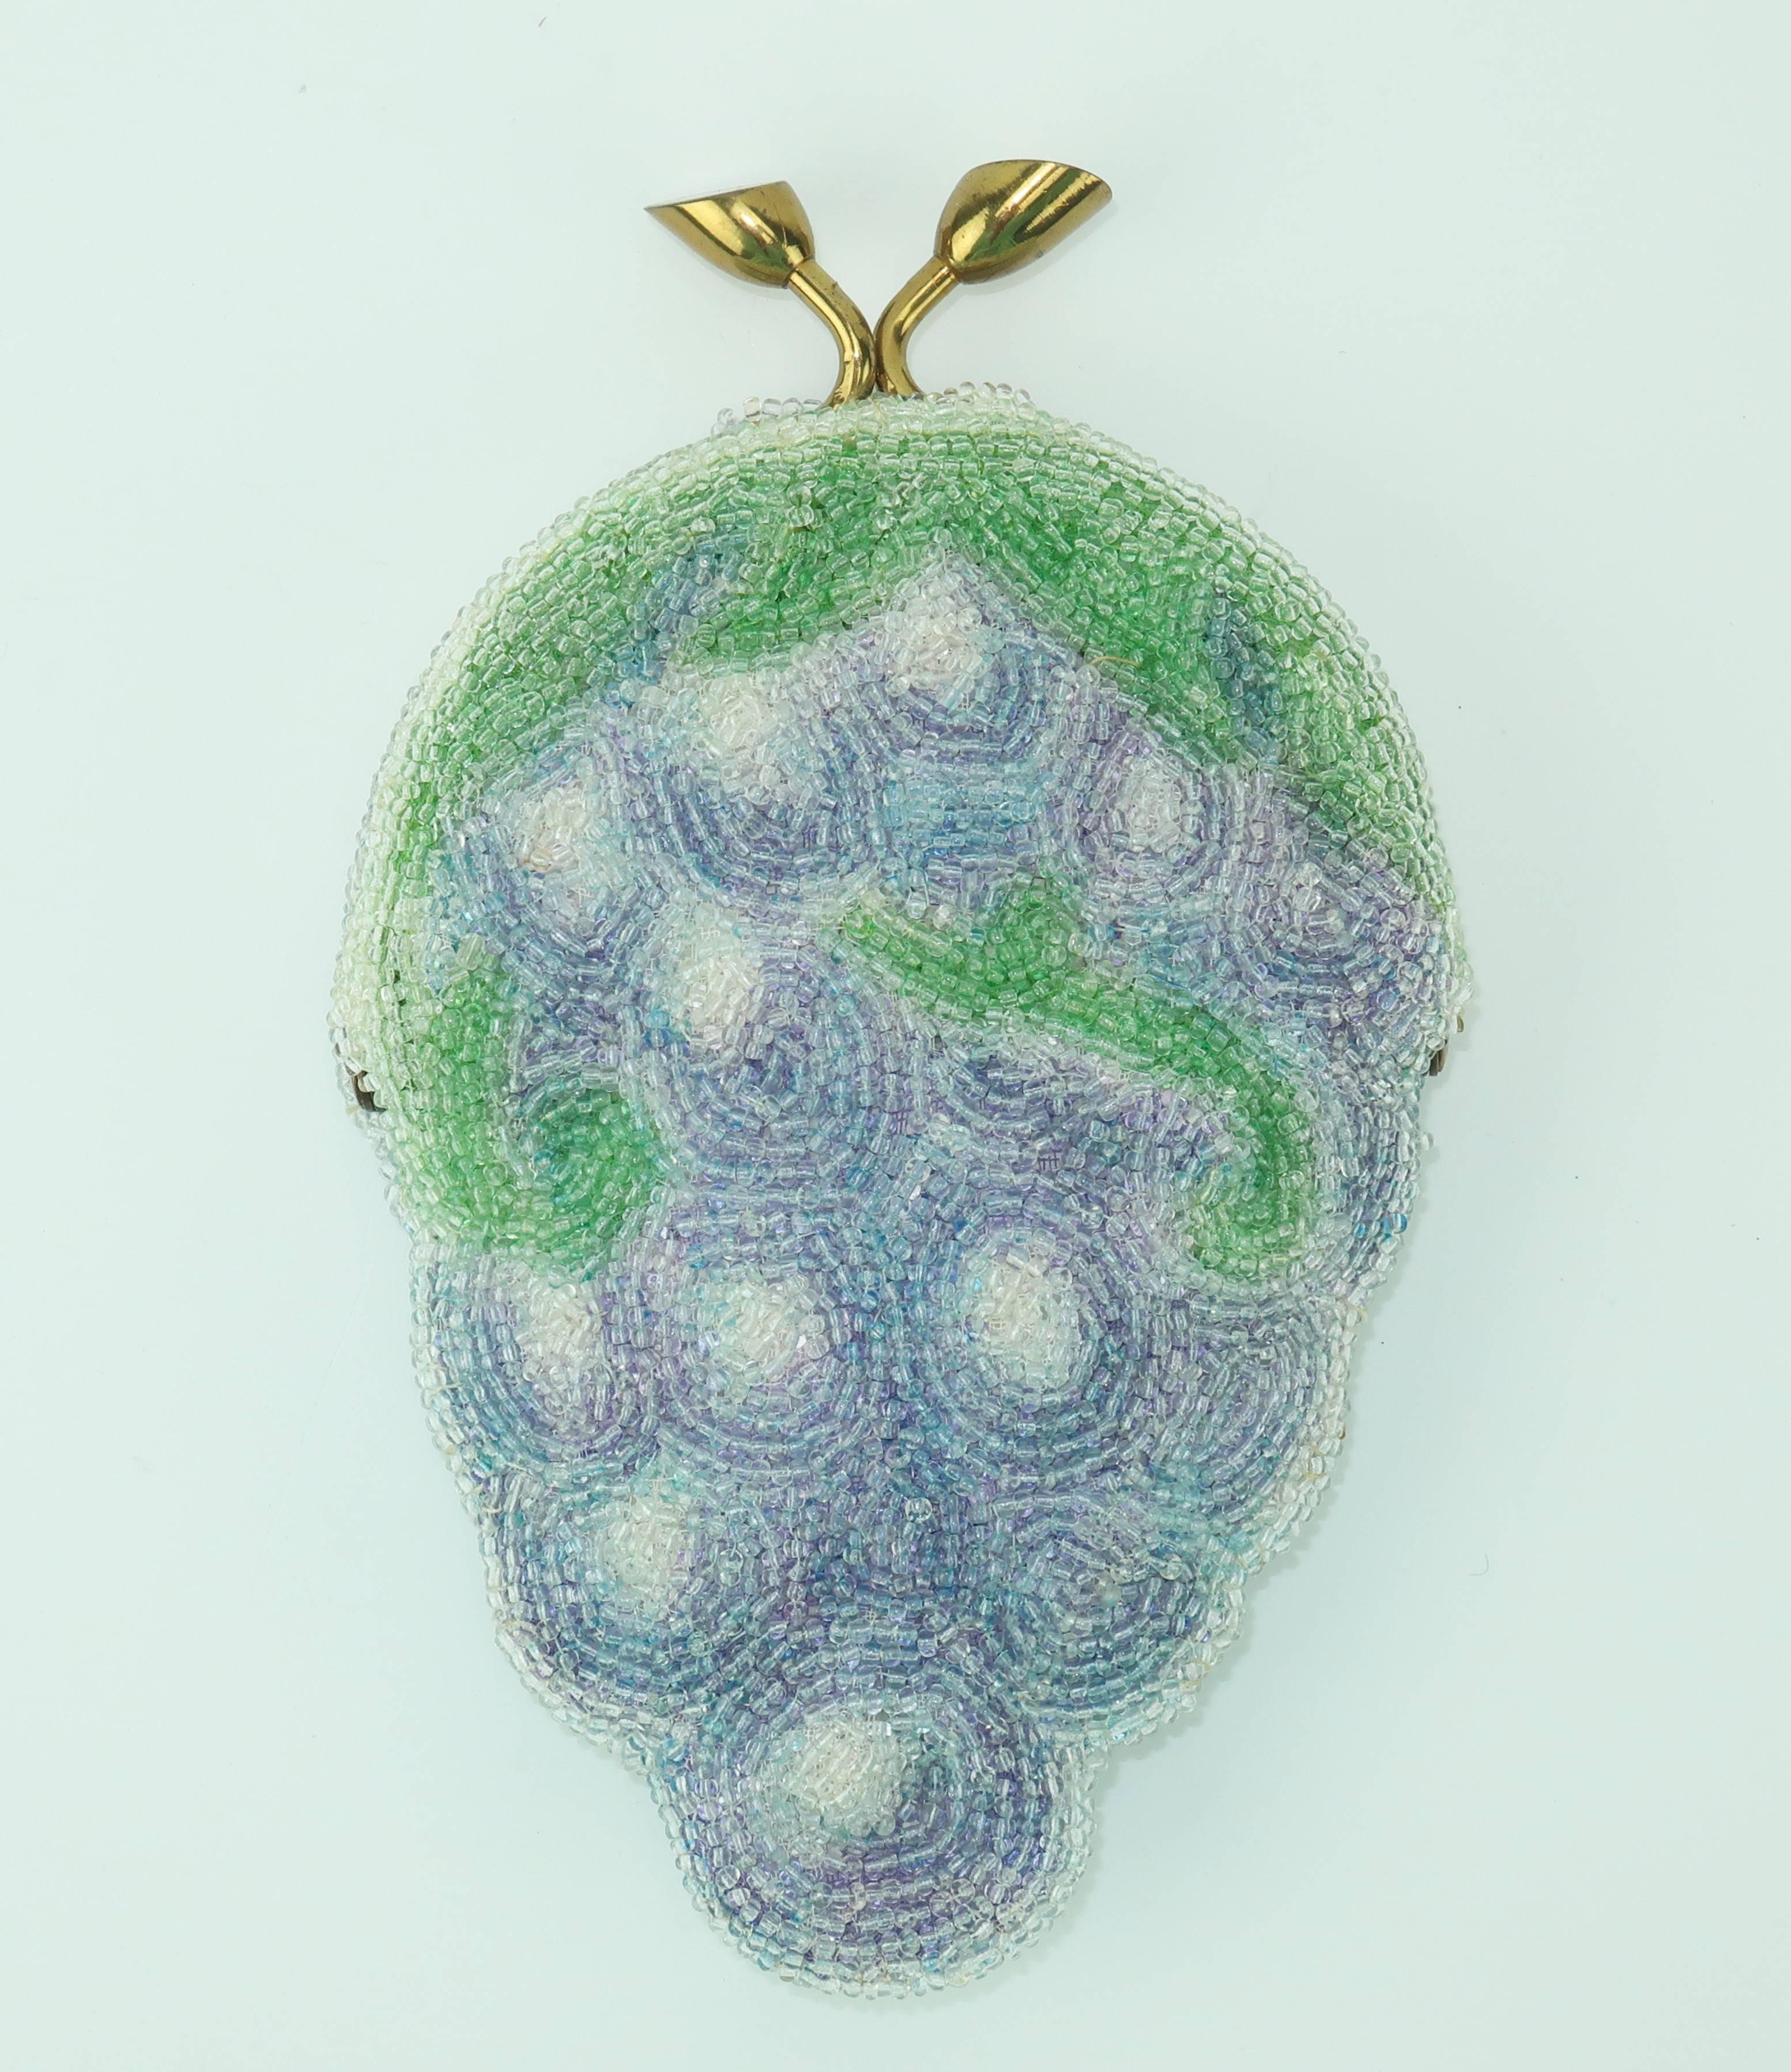 The charm of this novelty change purse will bring a smile to your day.  It is beautifully handmade with micro beads to form an impressionist style grape image and opens with a brass kisslock stem shaped closure to reveal a satin lined interior.  The